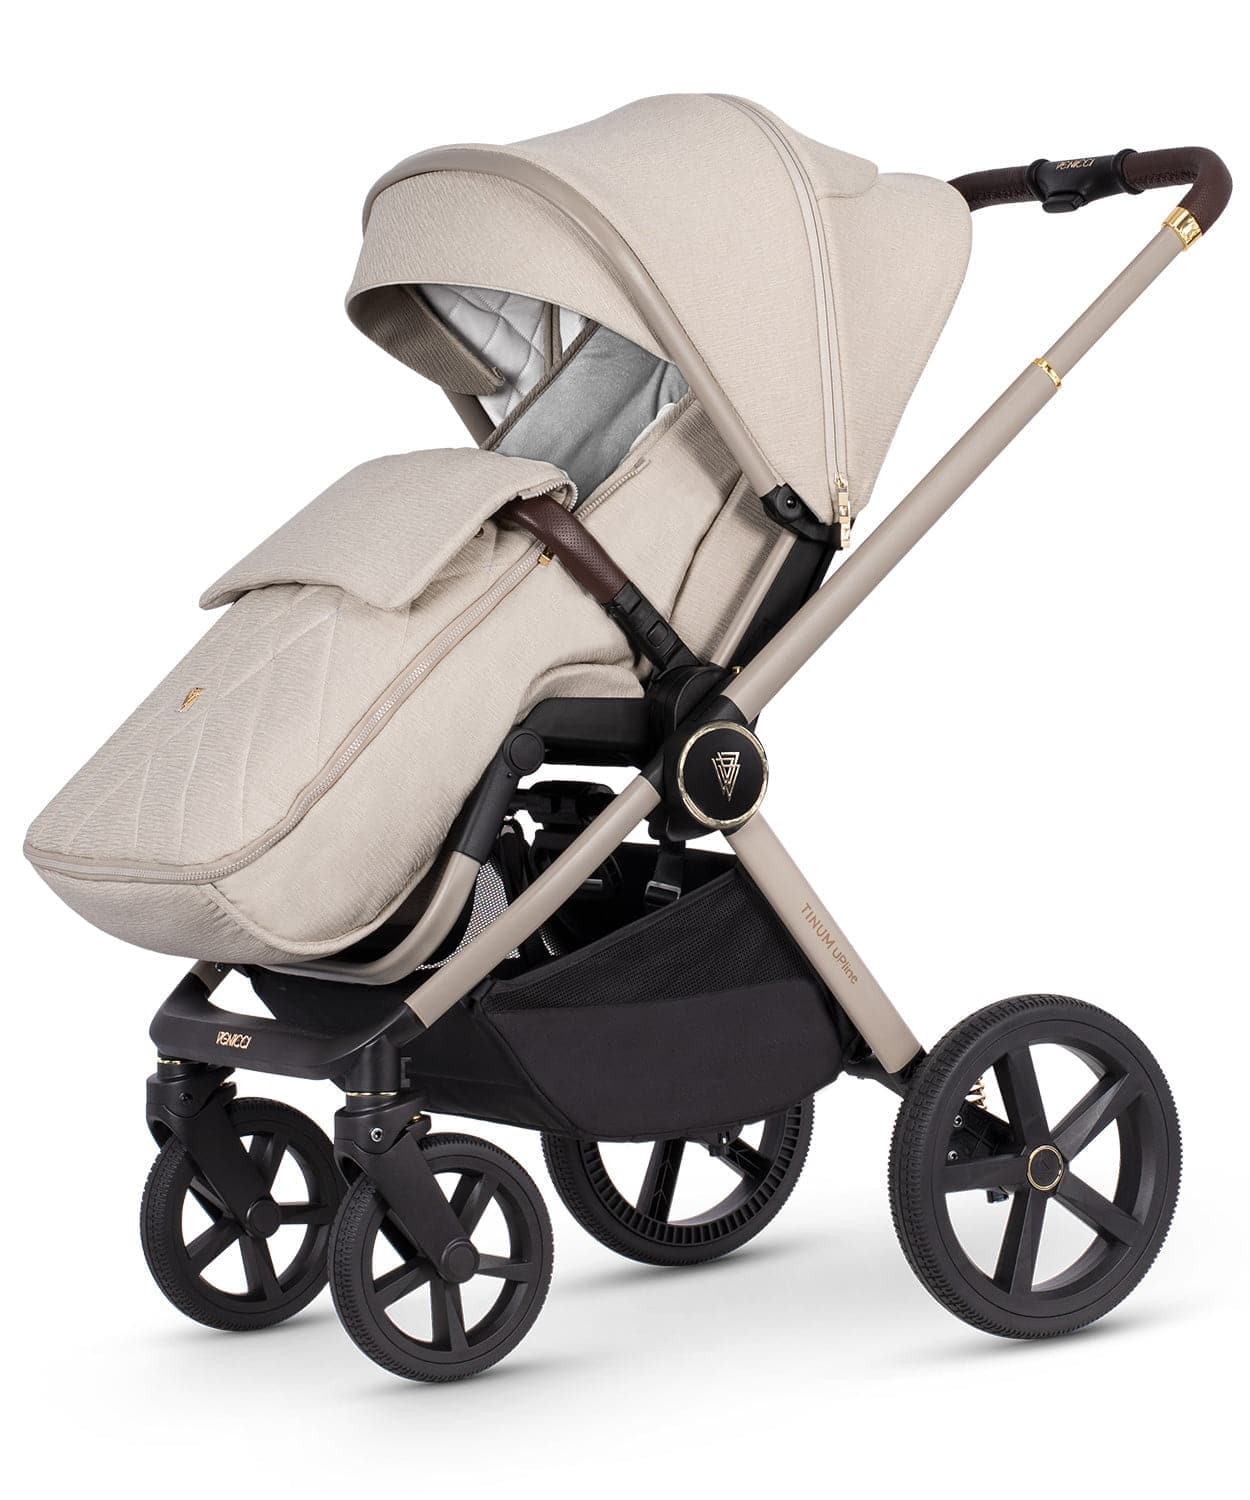 Venicci Tinum Upline 3 in 1 Travel System Bundle + Base - Stone Beige - For Your Little One